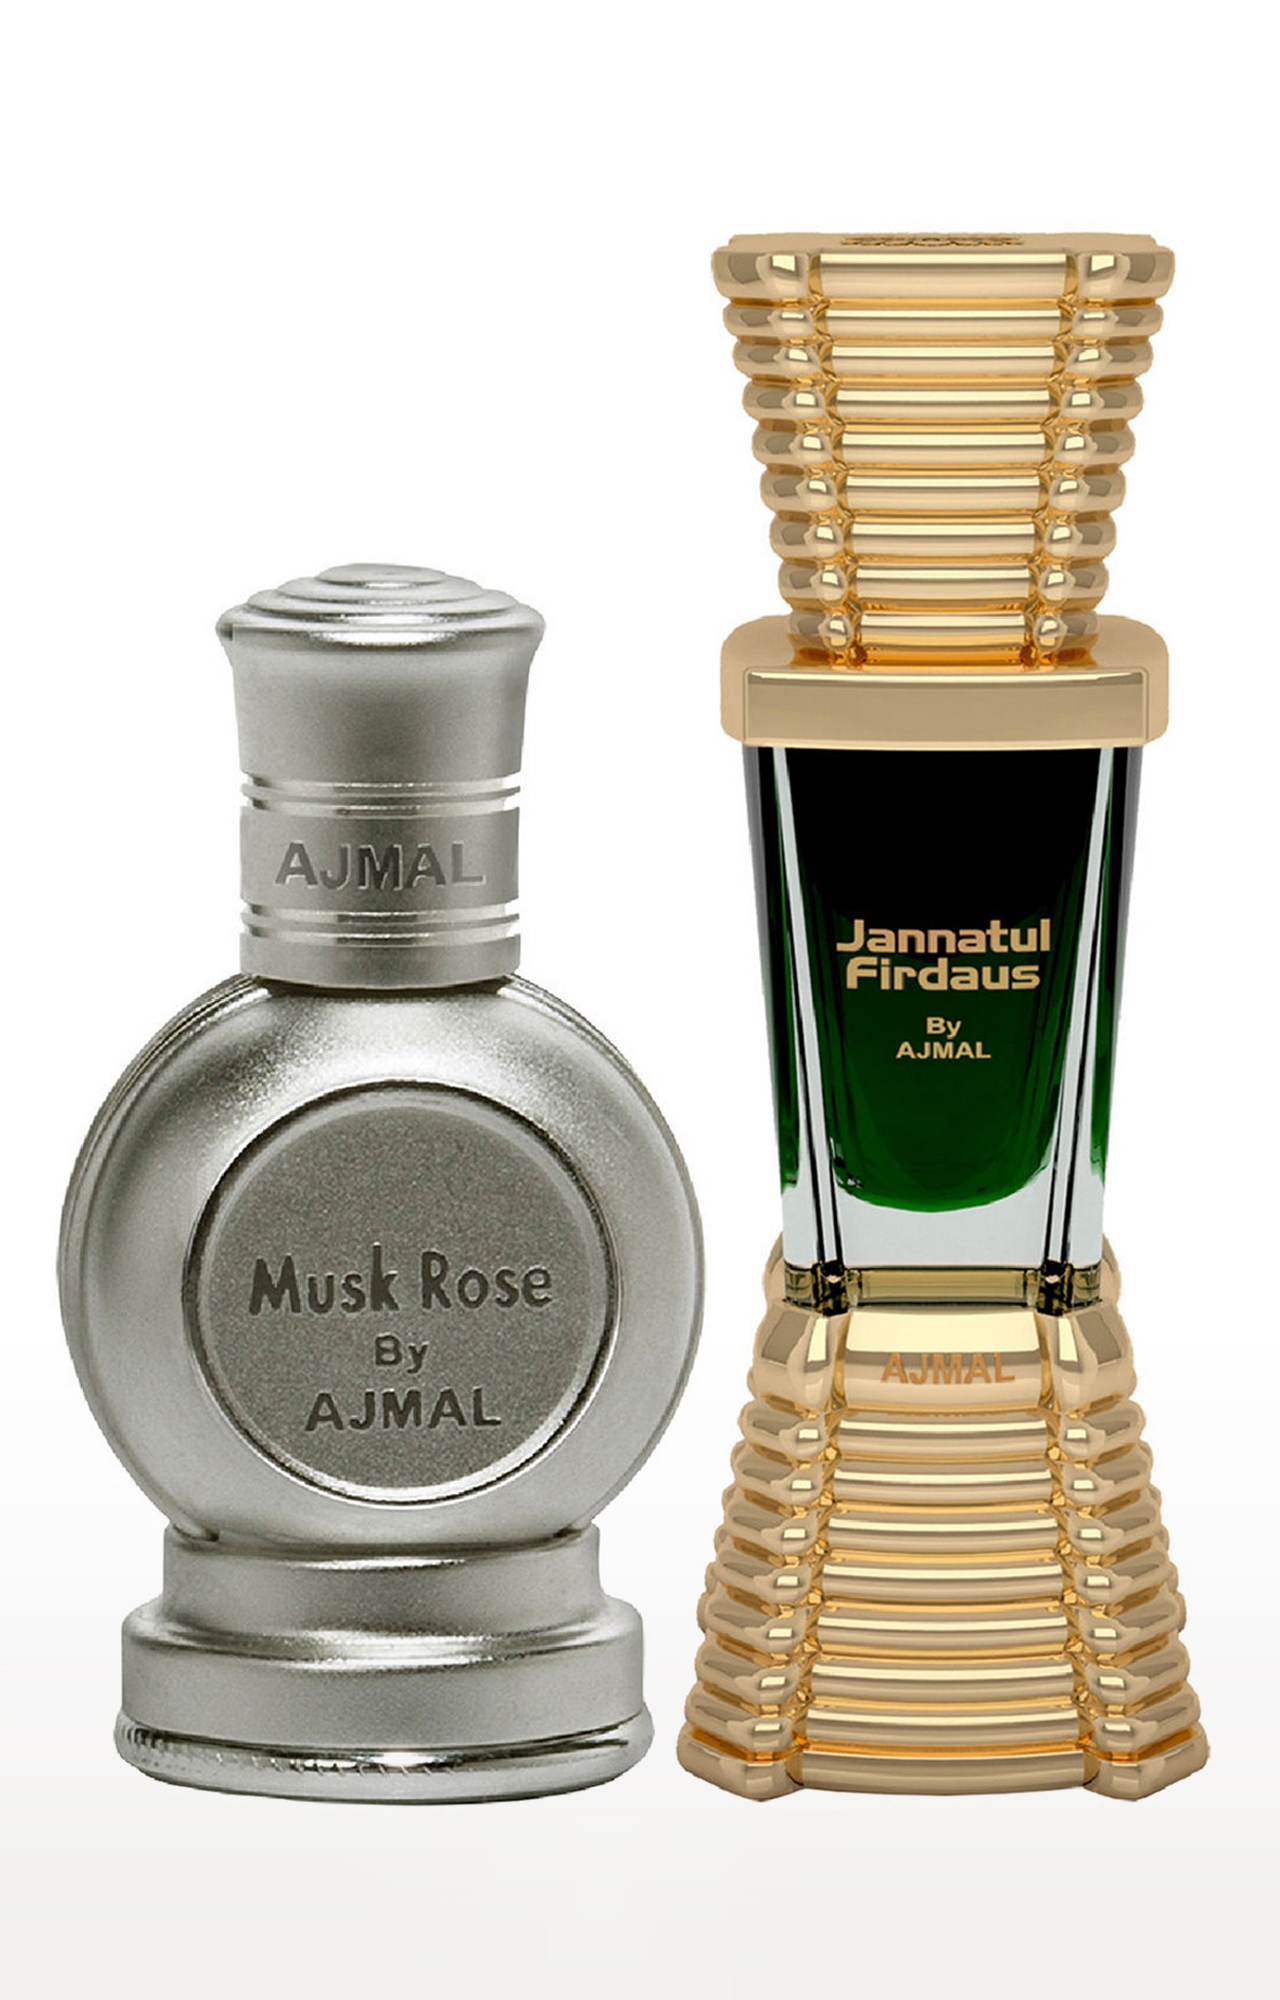 Ajmal Musk Rose Concentrated Perfume Oil Musky Alcohol-free Attar 12ml for Unisex and Jannatul Firdaus Concentrated Perfume Oil Oriental Alcohol-free Attar 10ml for Unisex